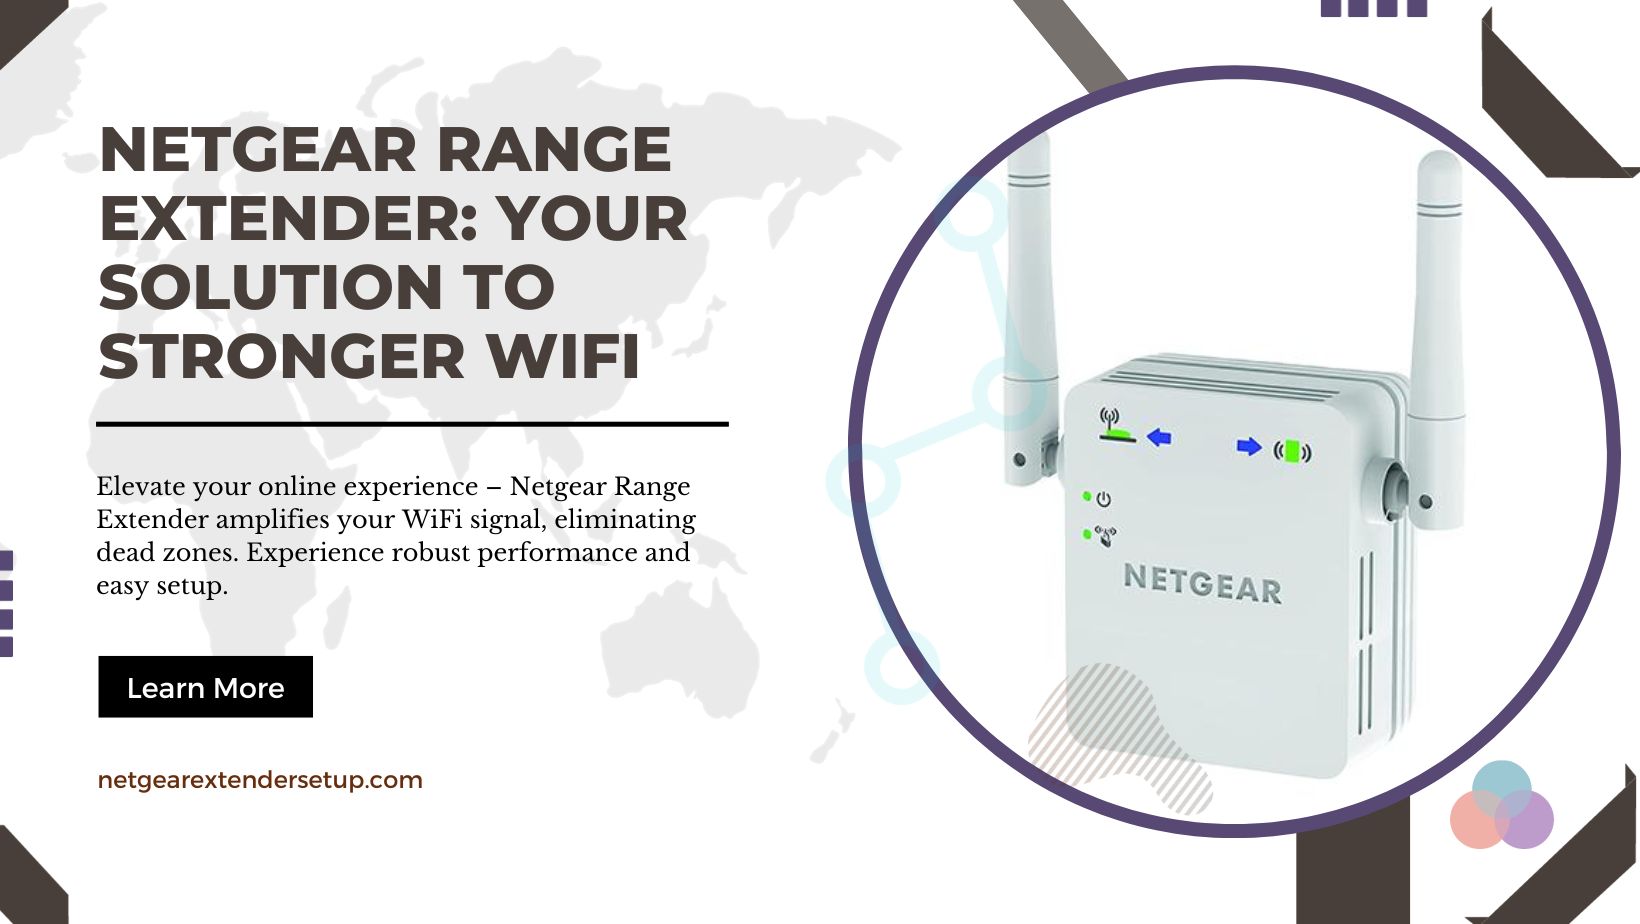 You are currently viewing Netgear Range Extender: Your Solution to Stronger WiFi